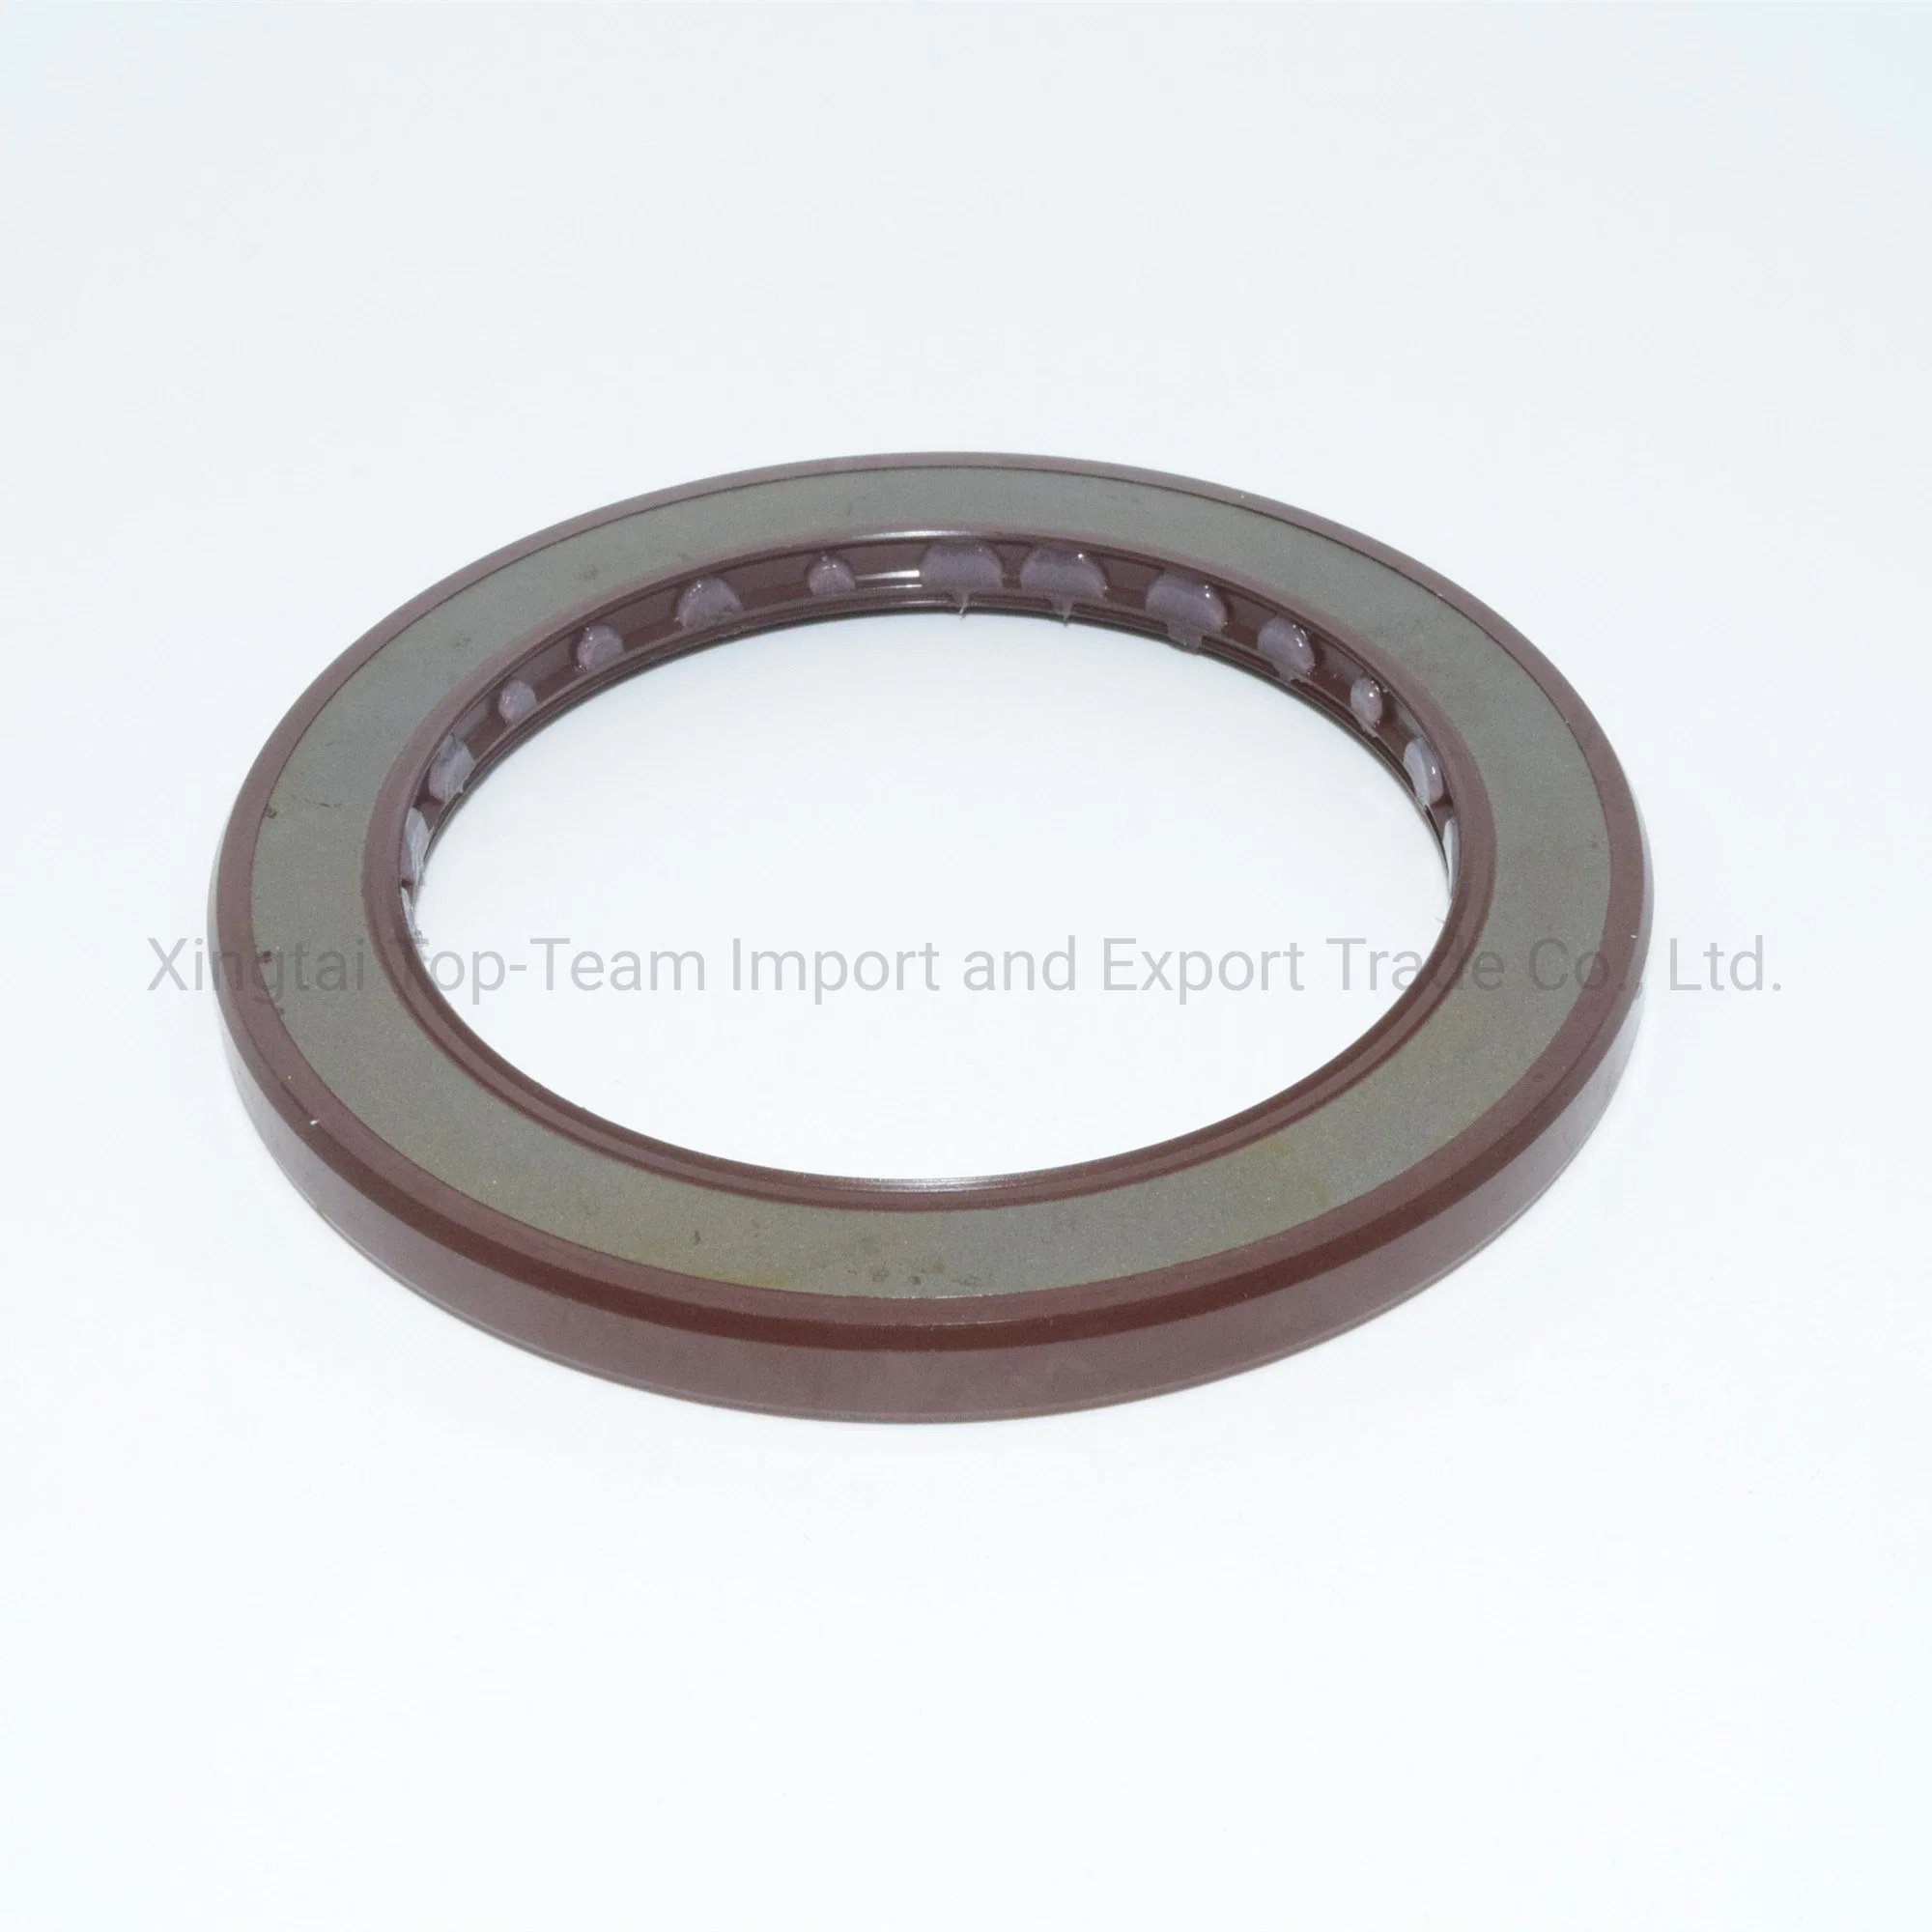 High Pressure Rotary Oil Seal 65*88*7mm for Pump with Bafsl1sf